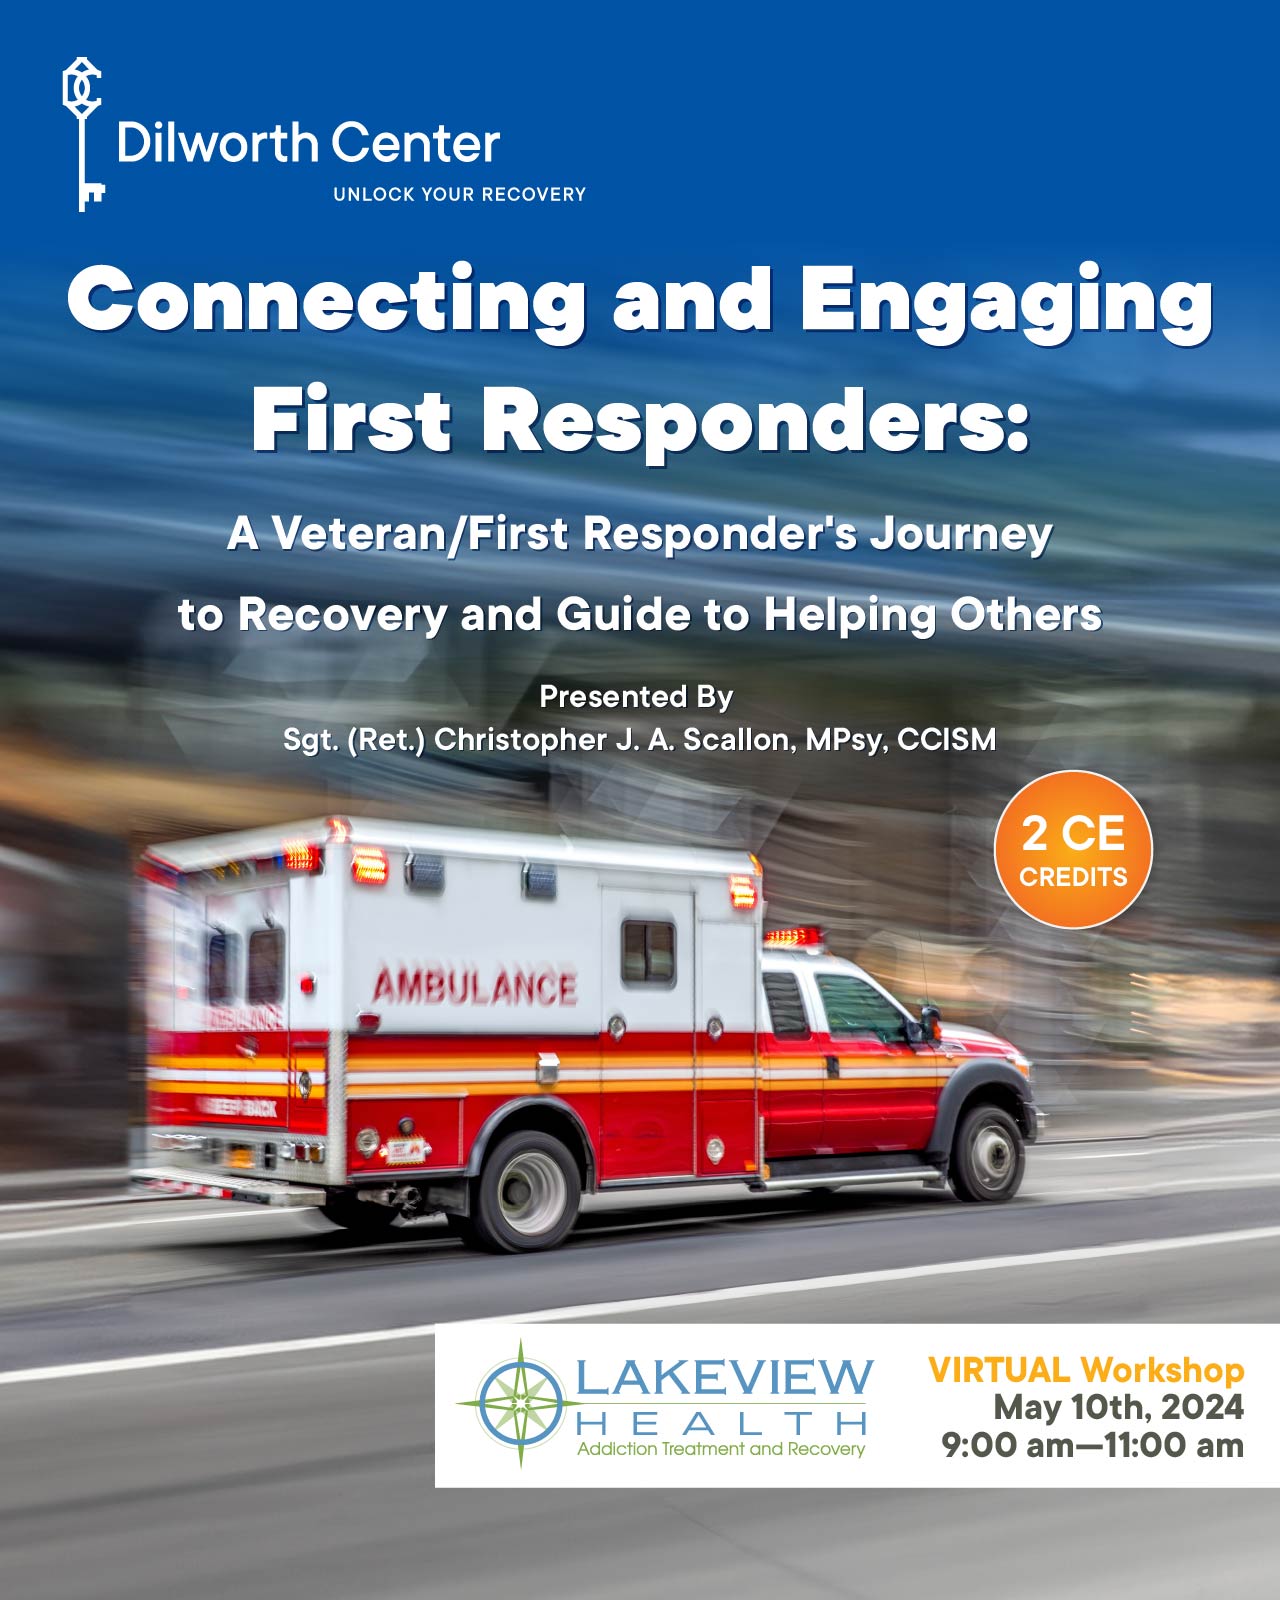 Engaging first responders training